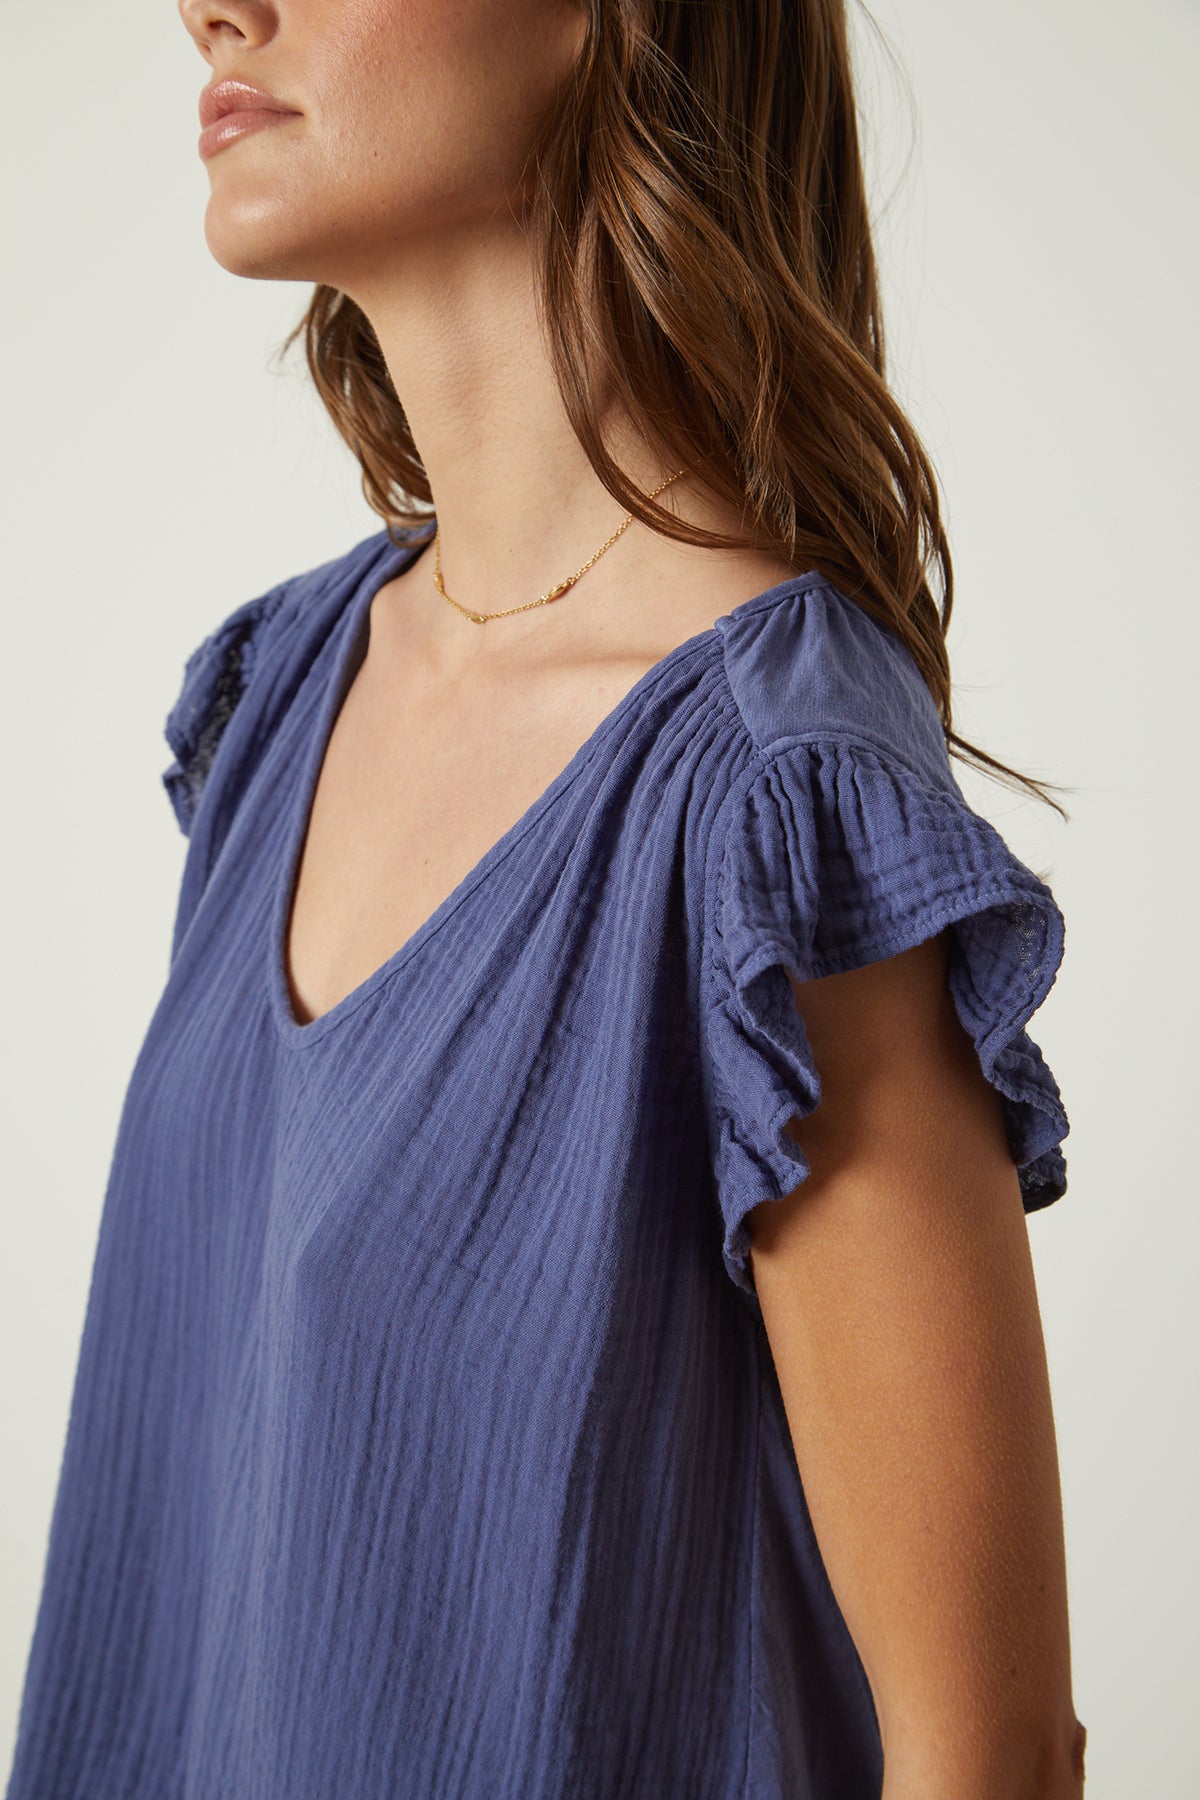 The model is wearing a Velvet by Graham & Spencer REMI RUFFLE SLEEVE TOP.-26631974191297